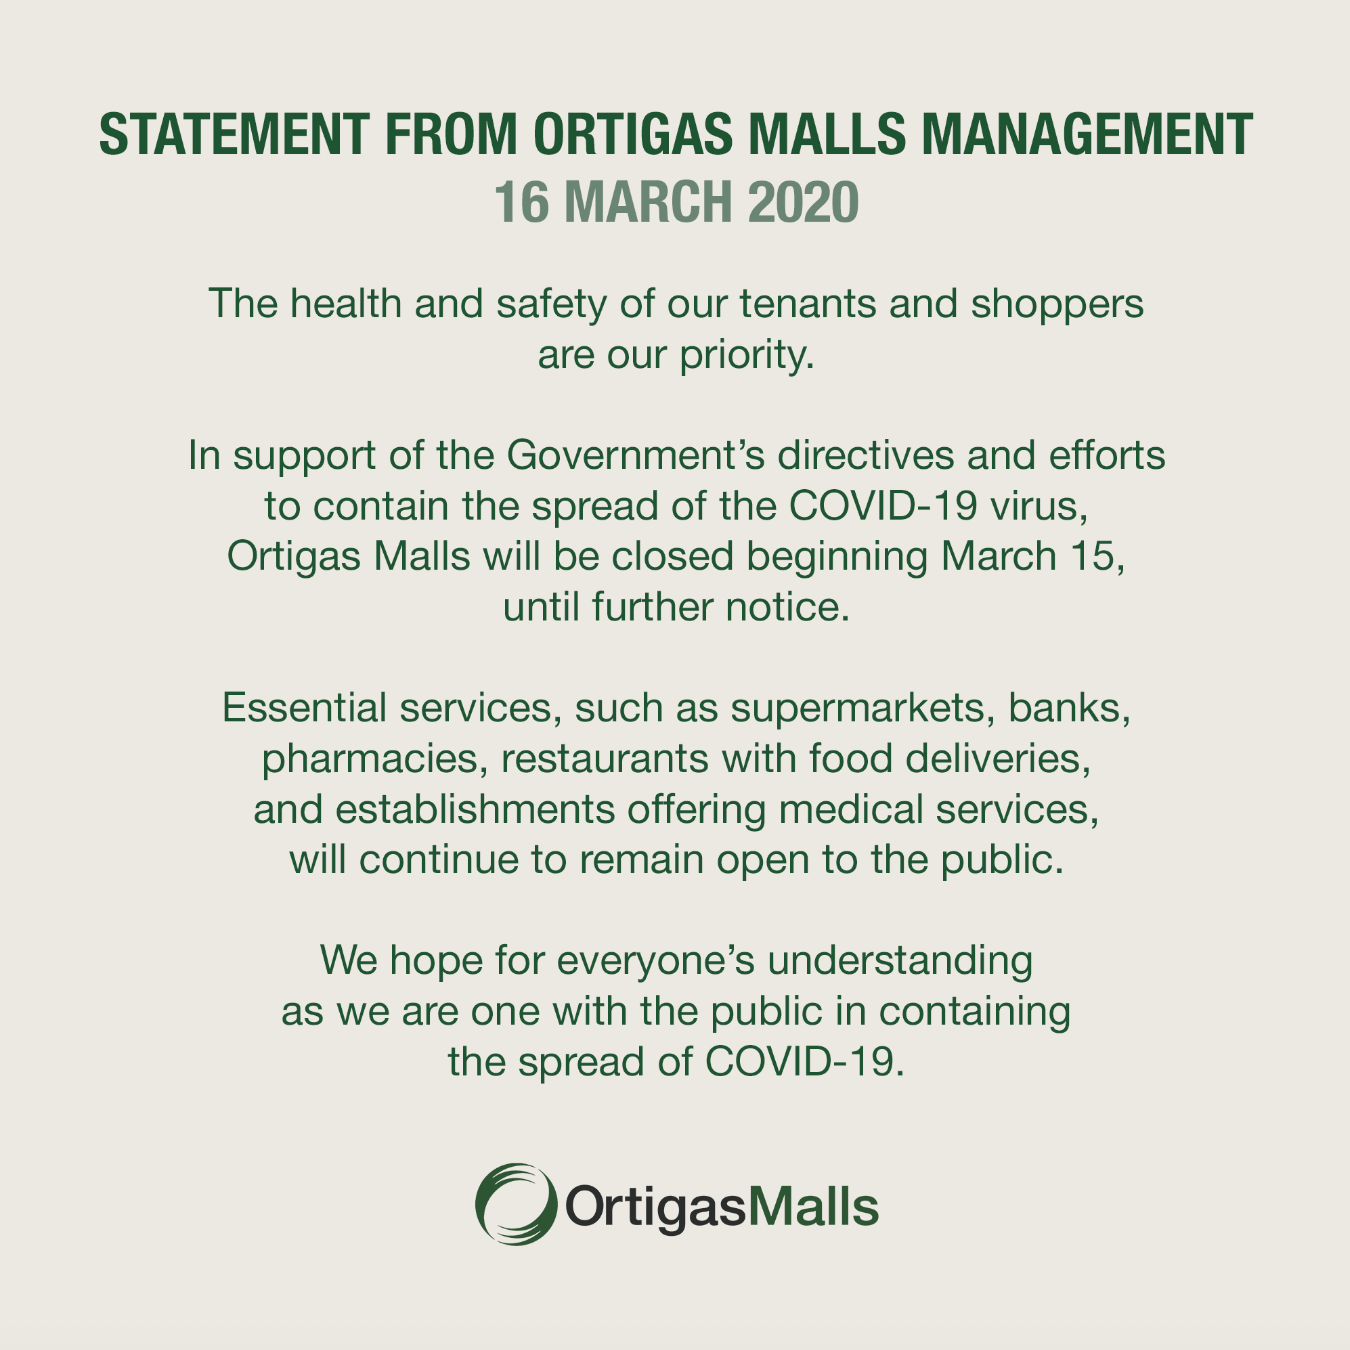 Adjusted Mall Hours of Ortigas Malls